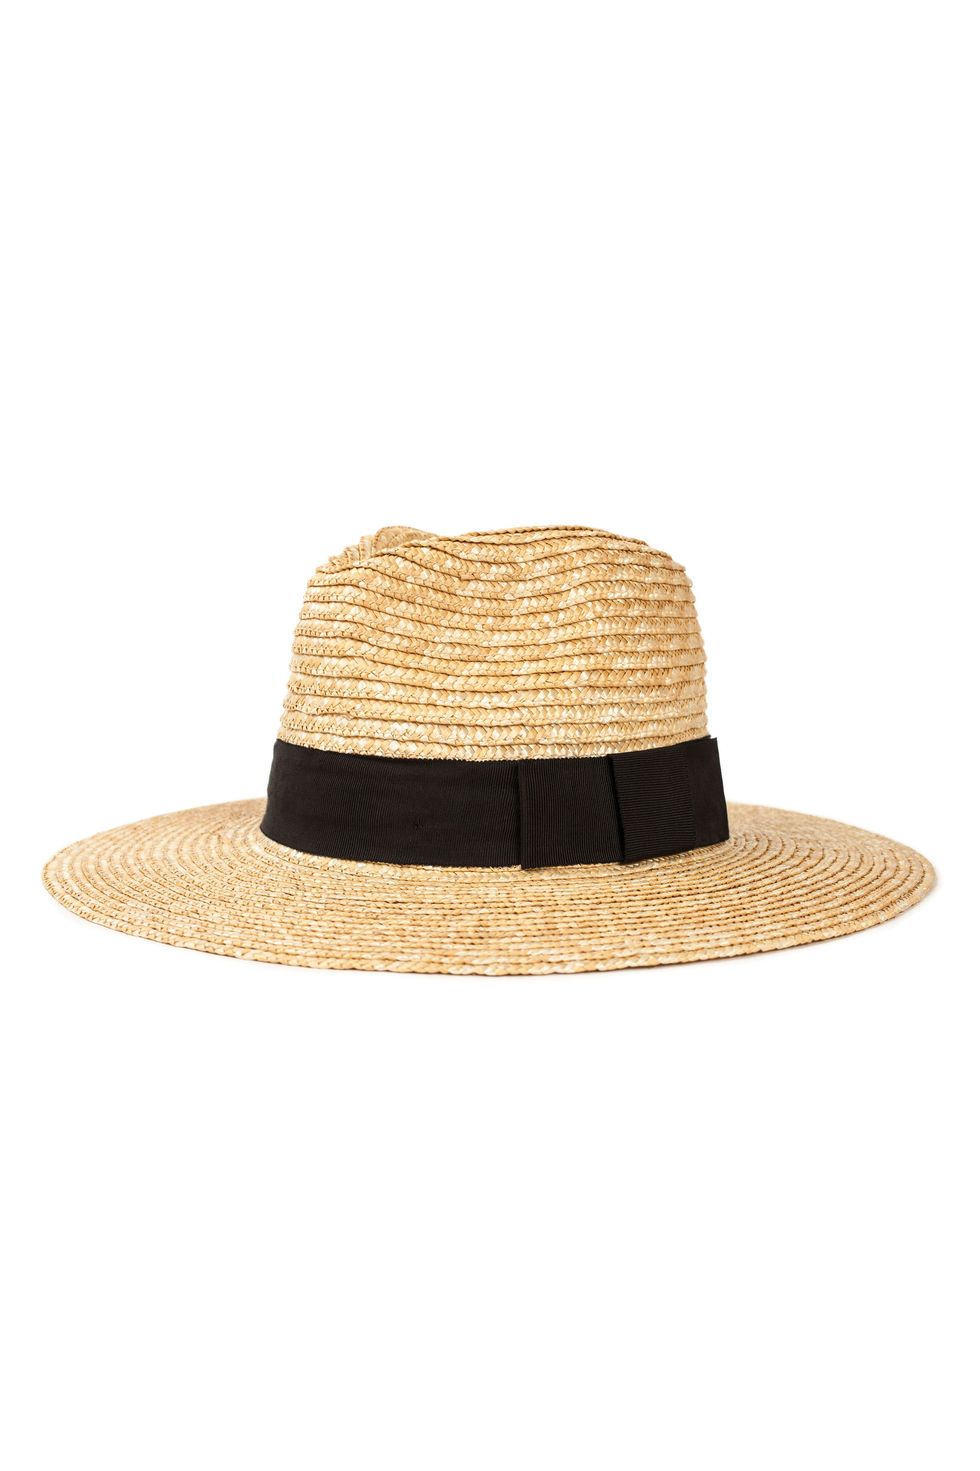 39 Examples of Womens Straw Hats for Summer You'll want to Rock